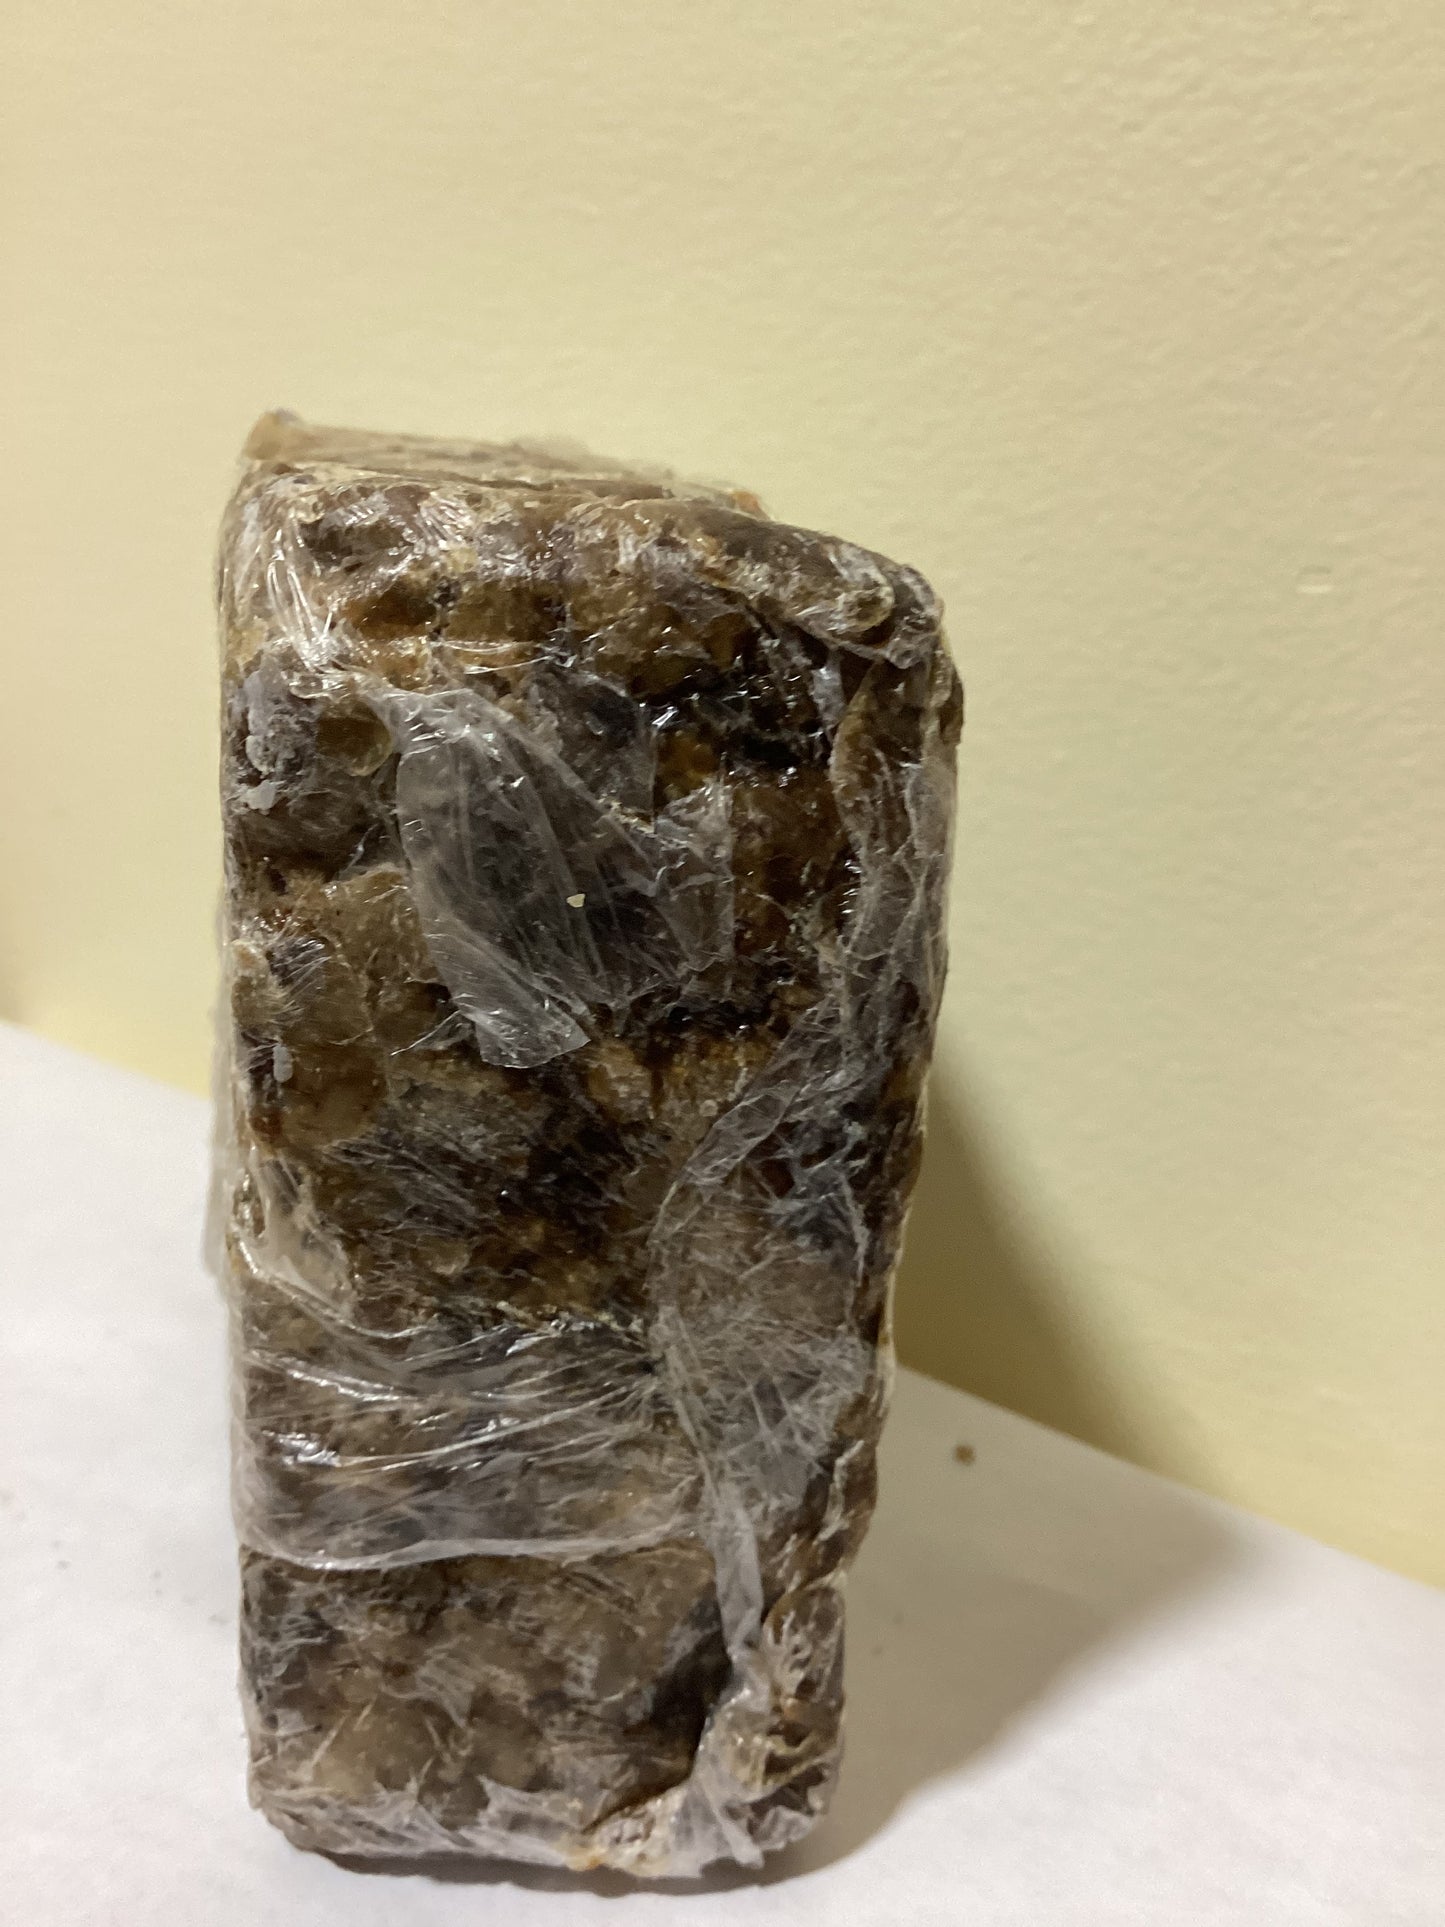 Raw African Black Soap  large